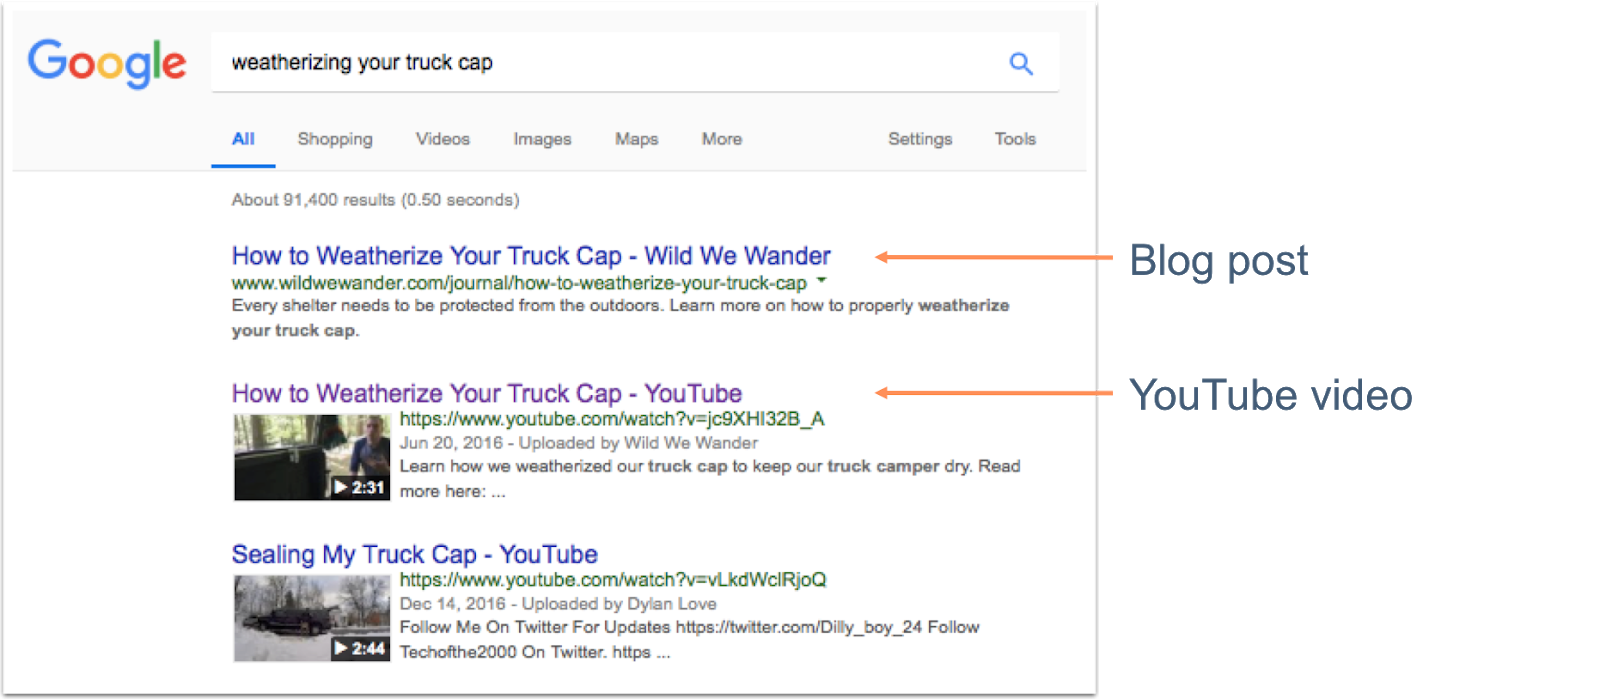 Google search results displaying YouTube